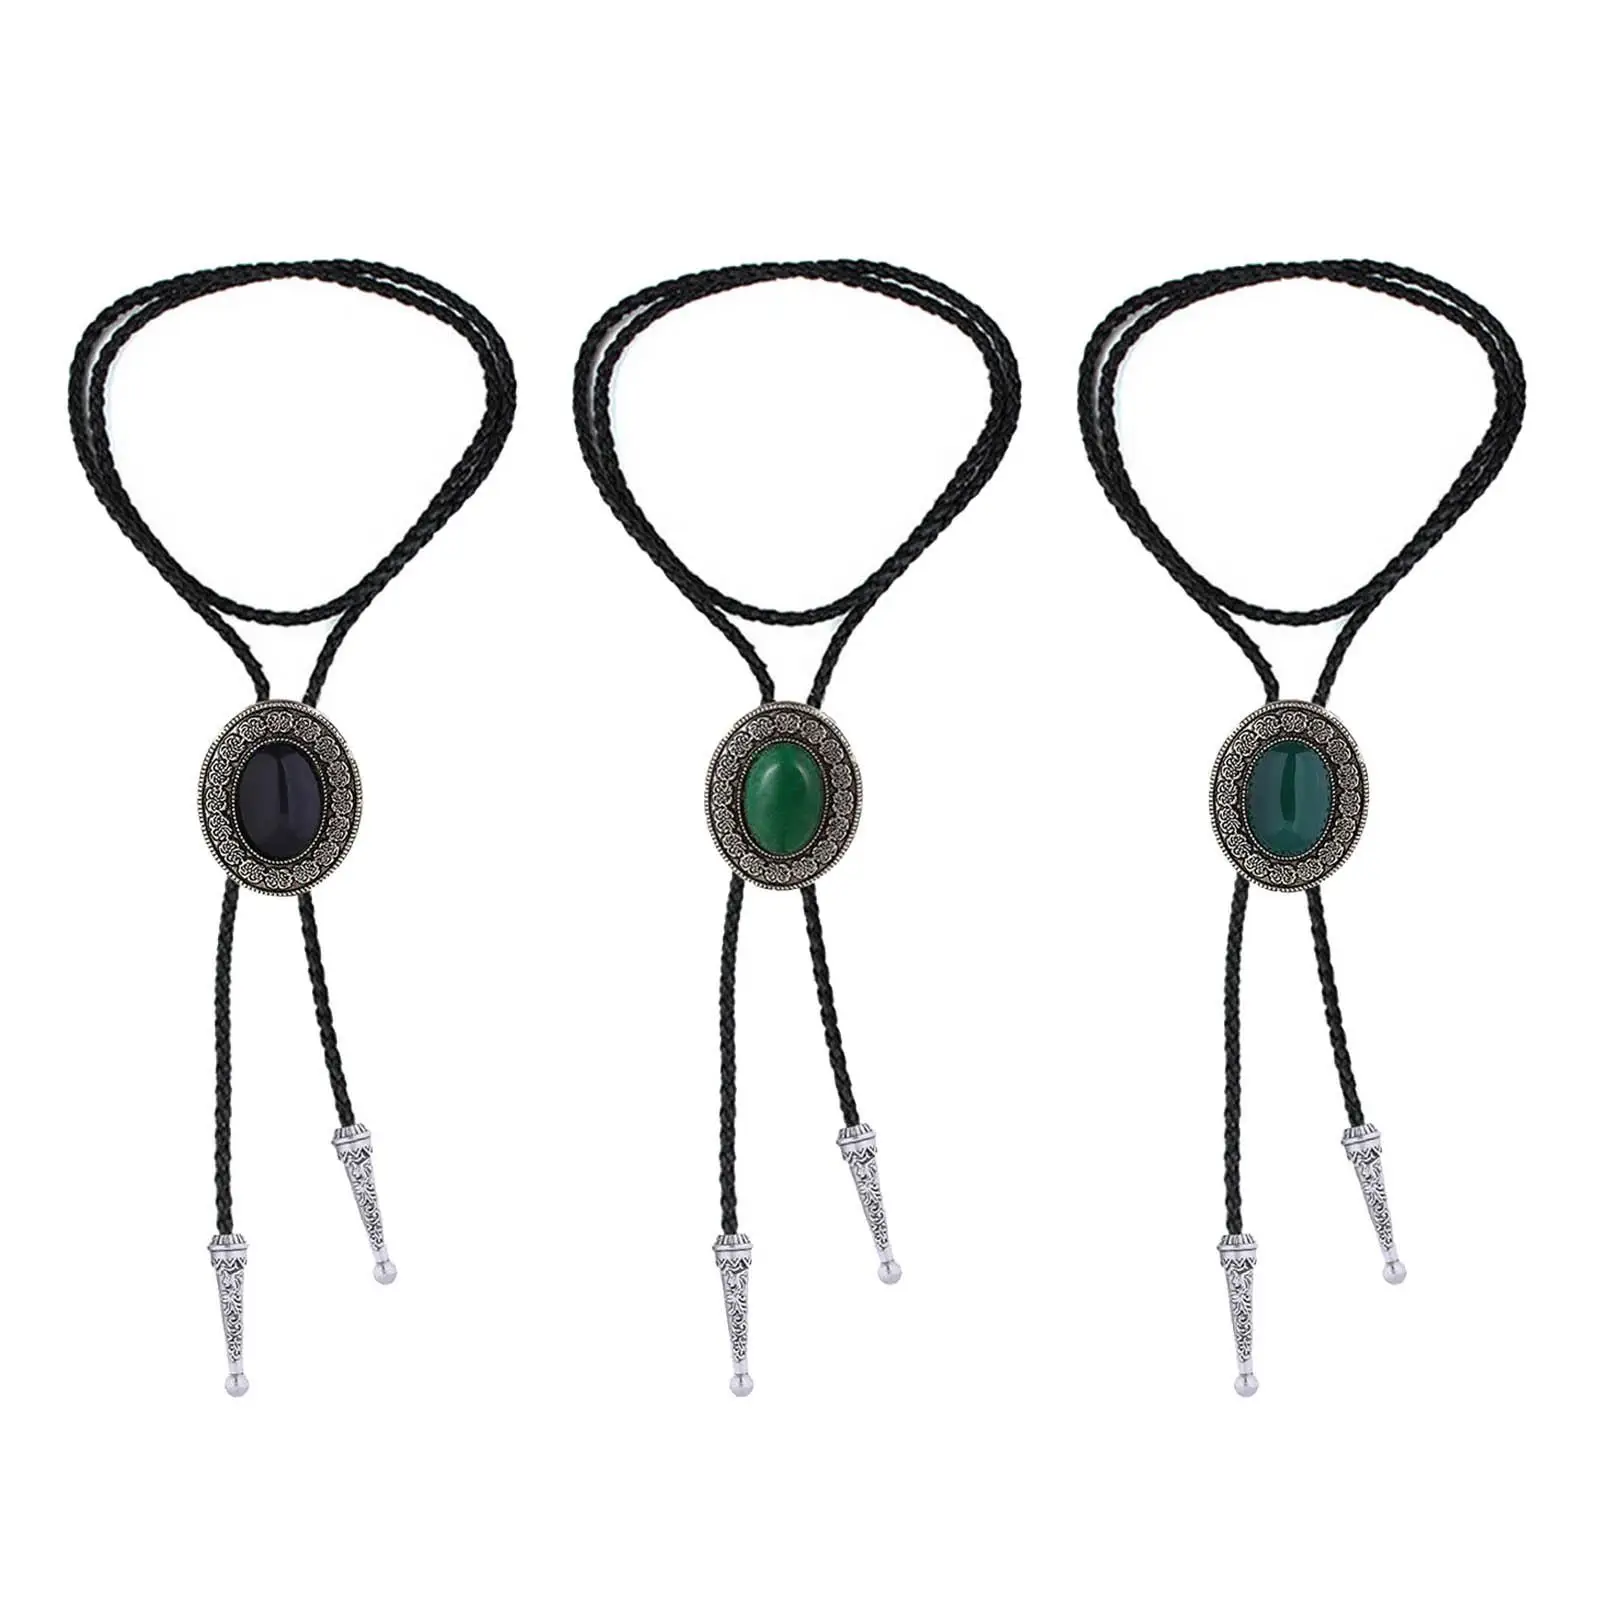 Vintage Style Bolo Tie for Men Round Shape with Natural Stone Native Western Bola Tie American Bow Tie Collar Rope Men Women